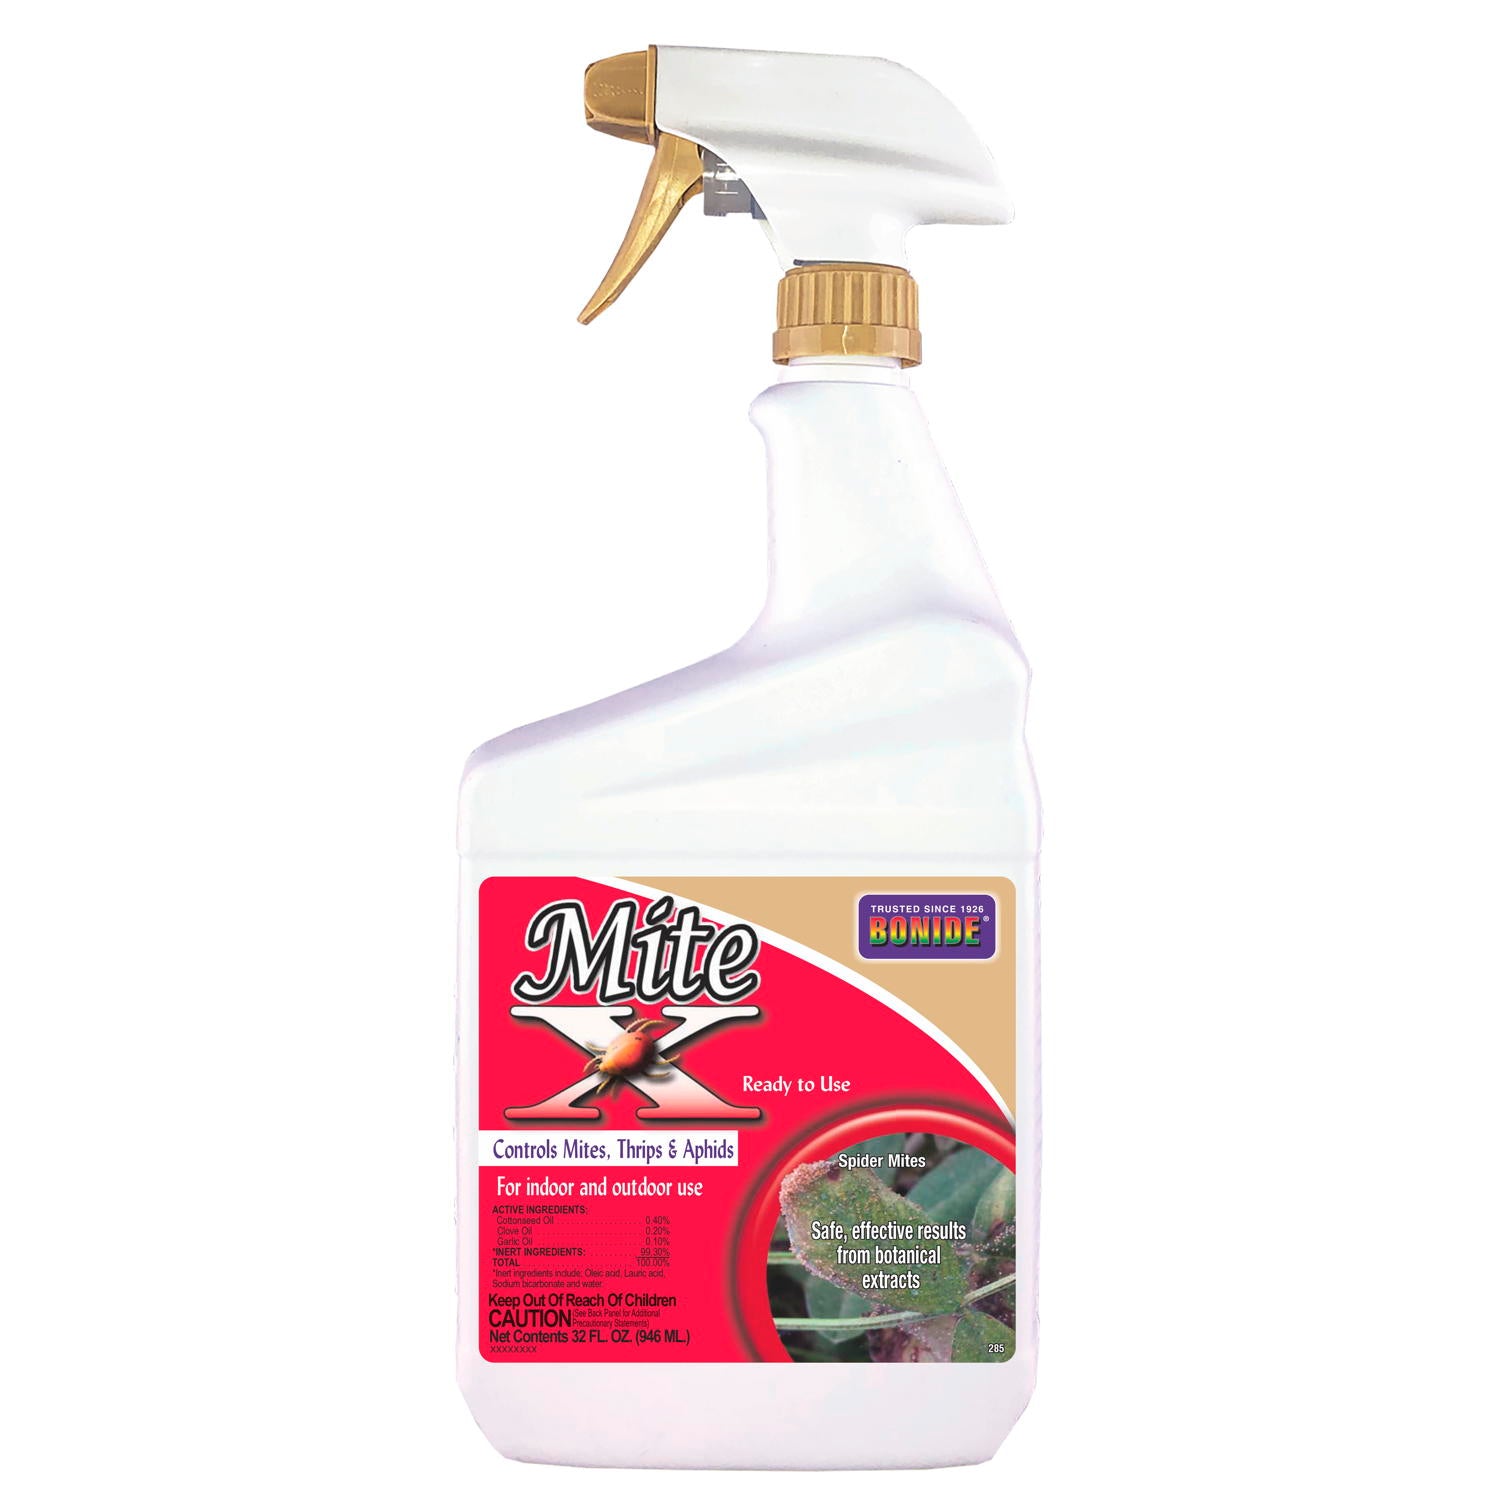 An indoor and outdoor insecticide great for spider mites, thrips and aphids. All Natural.